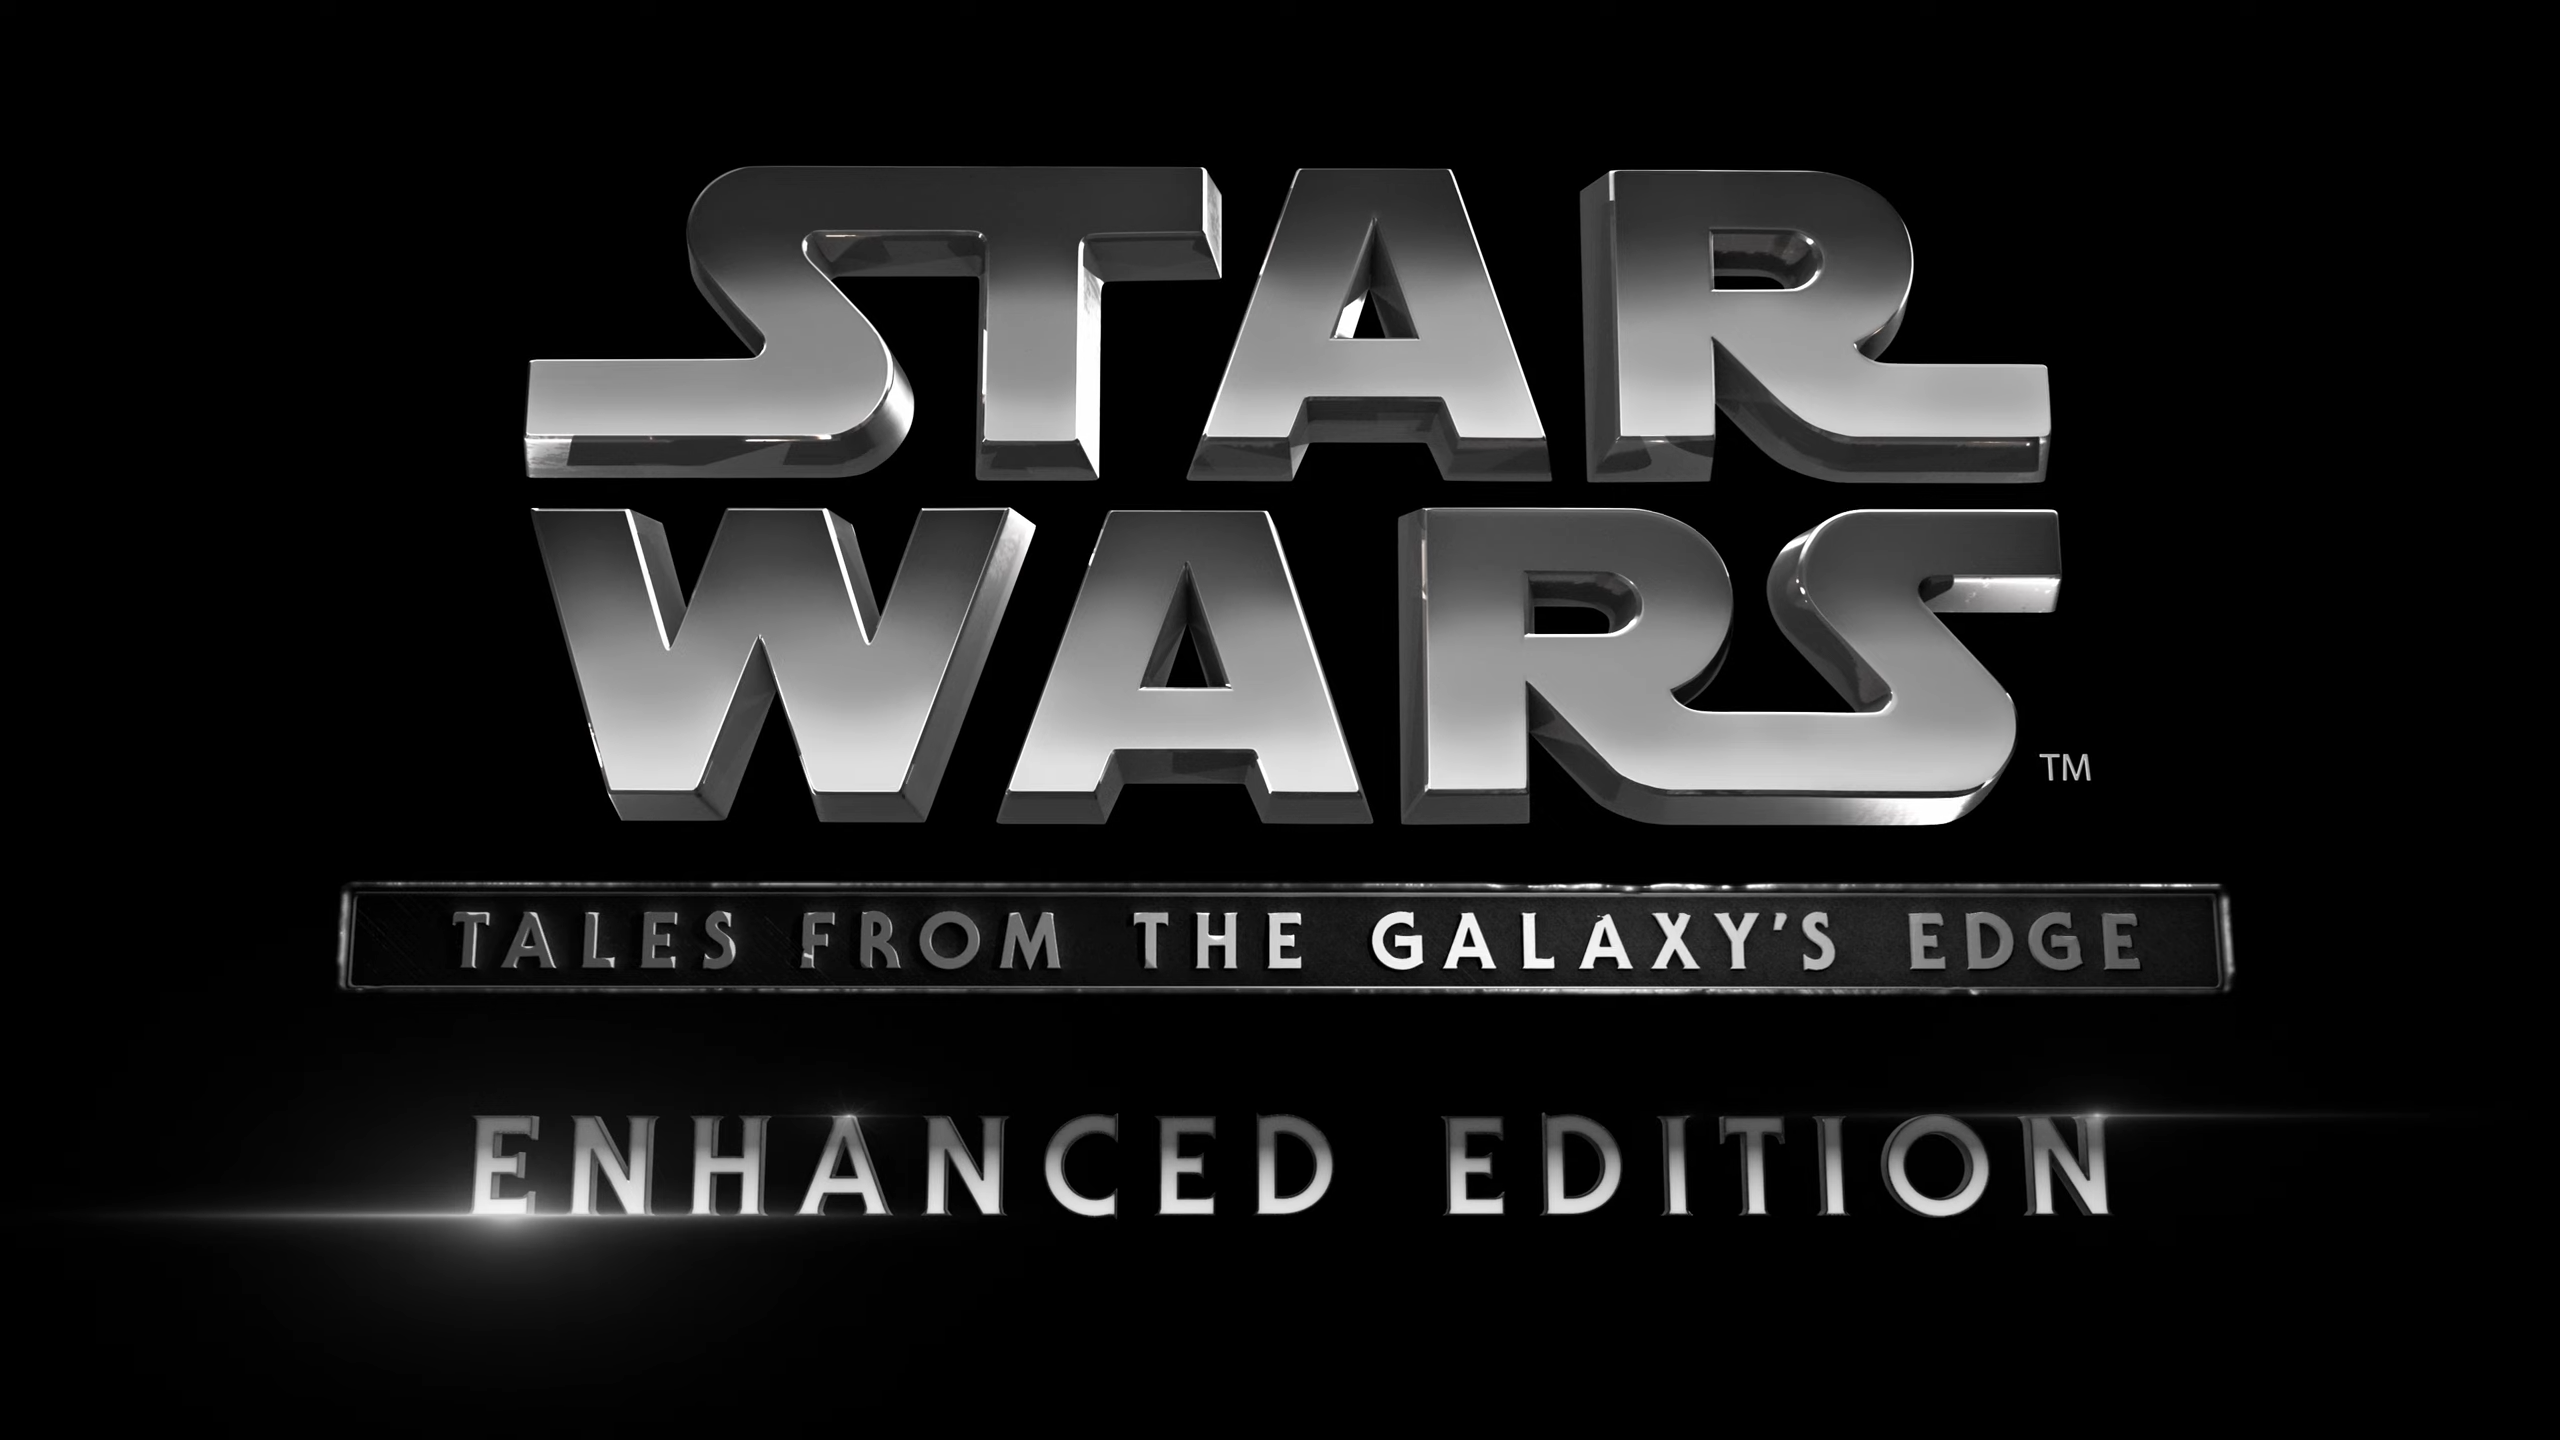 Star wars tales from the galaxy. Звездные войны 10. Star Wars: Tales from the Galaxy's Edge. Star Wars Tales from the Galaxy's Edge PS VR 2.